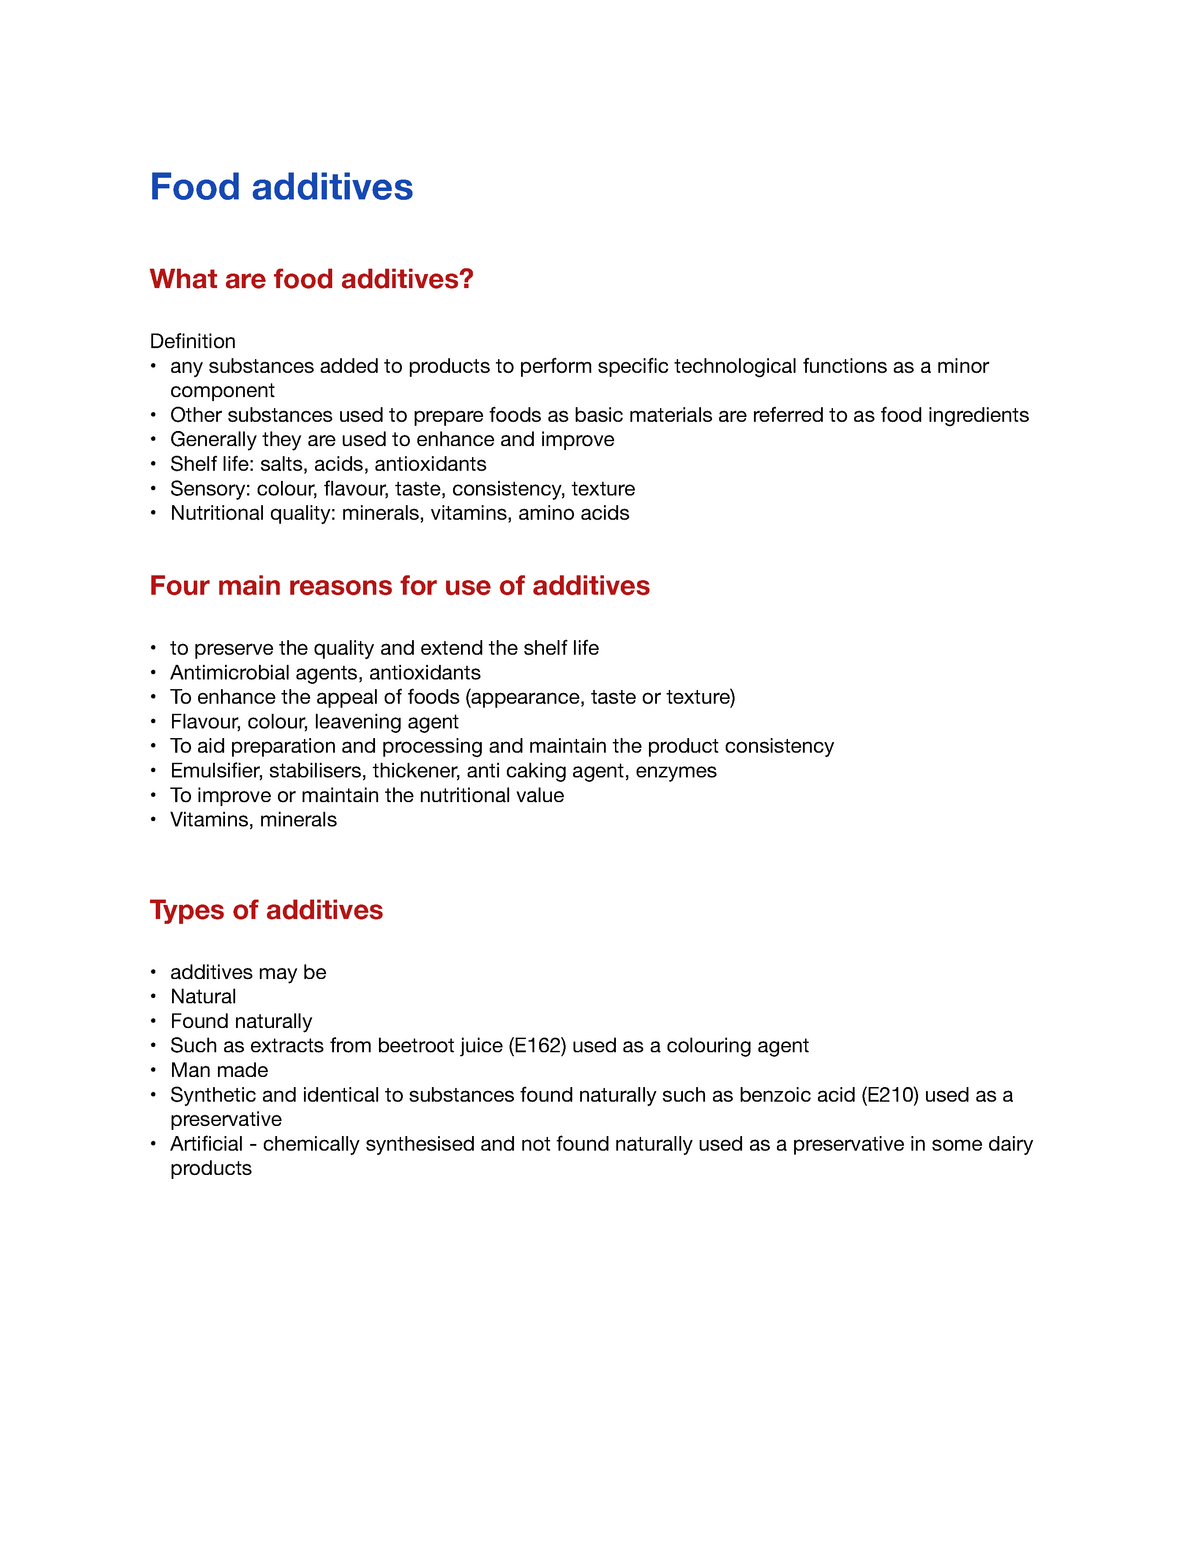 essay about food additives